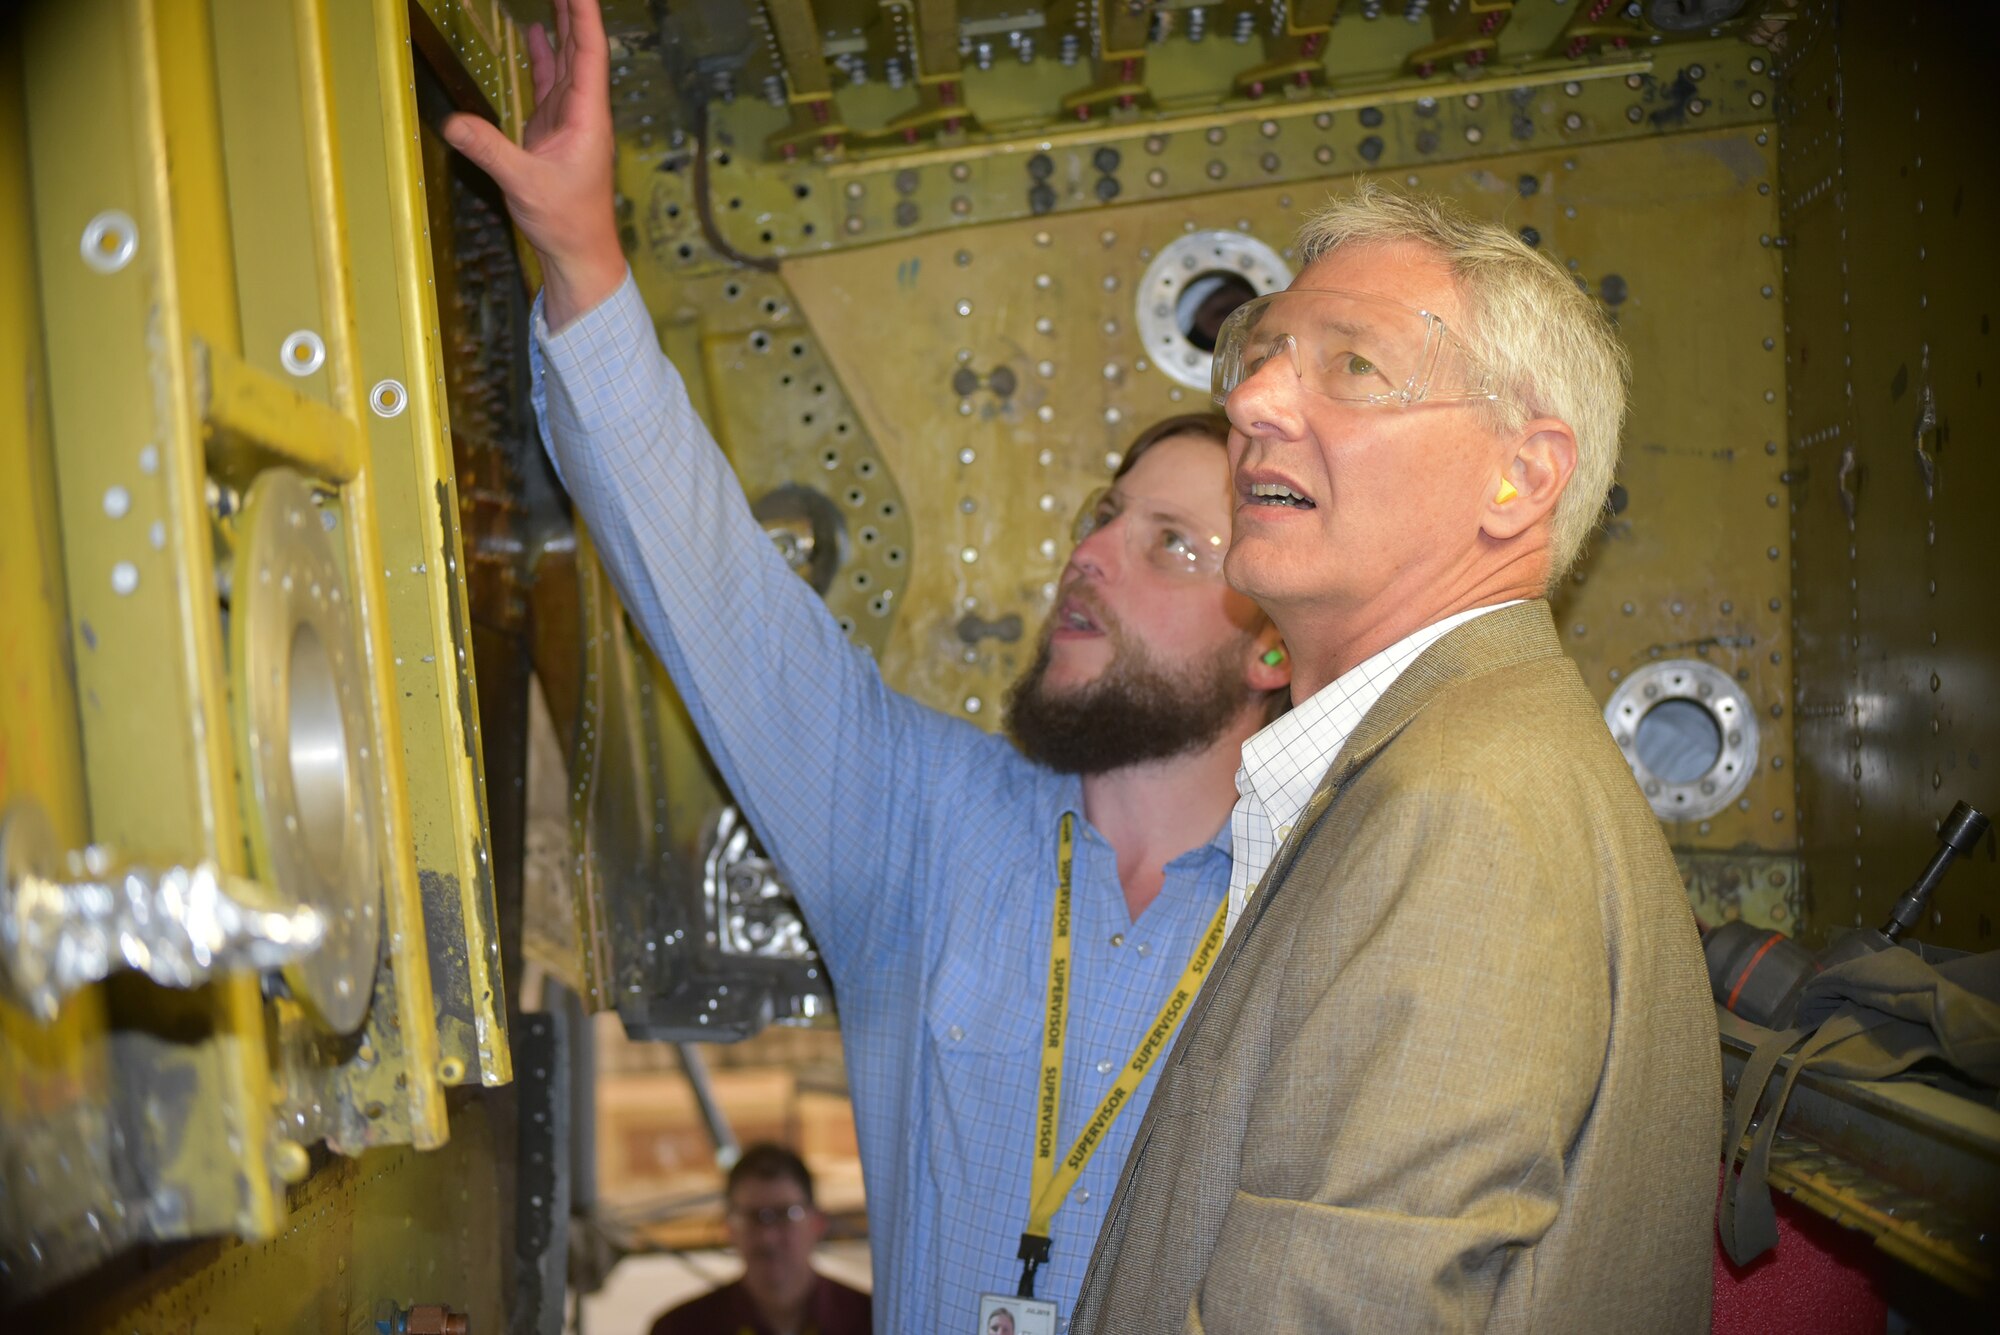 Daron Bender, a sheet metal chief with the 564th Aircraft Maintenance Squadron, left, provides Wayne Schatz Jr., associate deputy chief of staff for operations, headquarters, United States Air Force, with an overview of the aft wing terminal fitting and center wing spar replacement procedures being performed on the KC-135 “Stratotanker” during his visit to Tinker Air Force Base May 22-23. During his two-day visit, Schatz was able to discuss and receive updates on Air Force Sustainment Center logistics and sustainment, to include updates on the E-3 “Sentry” Airborne Warning and Control System aircraft, as well as impacts to fleet health and readiness as pilot production increases on Air Force weapon systems. (Air Force photo by Darren D. Heusel)